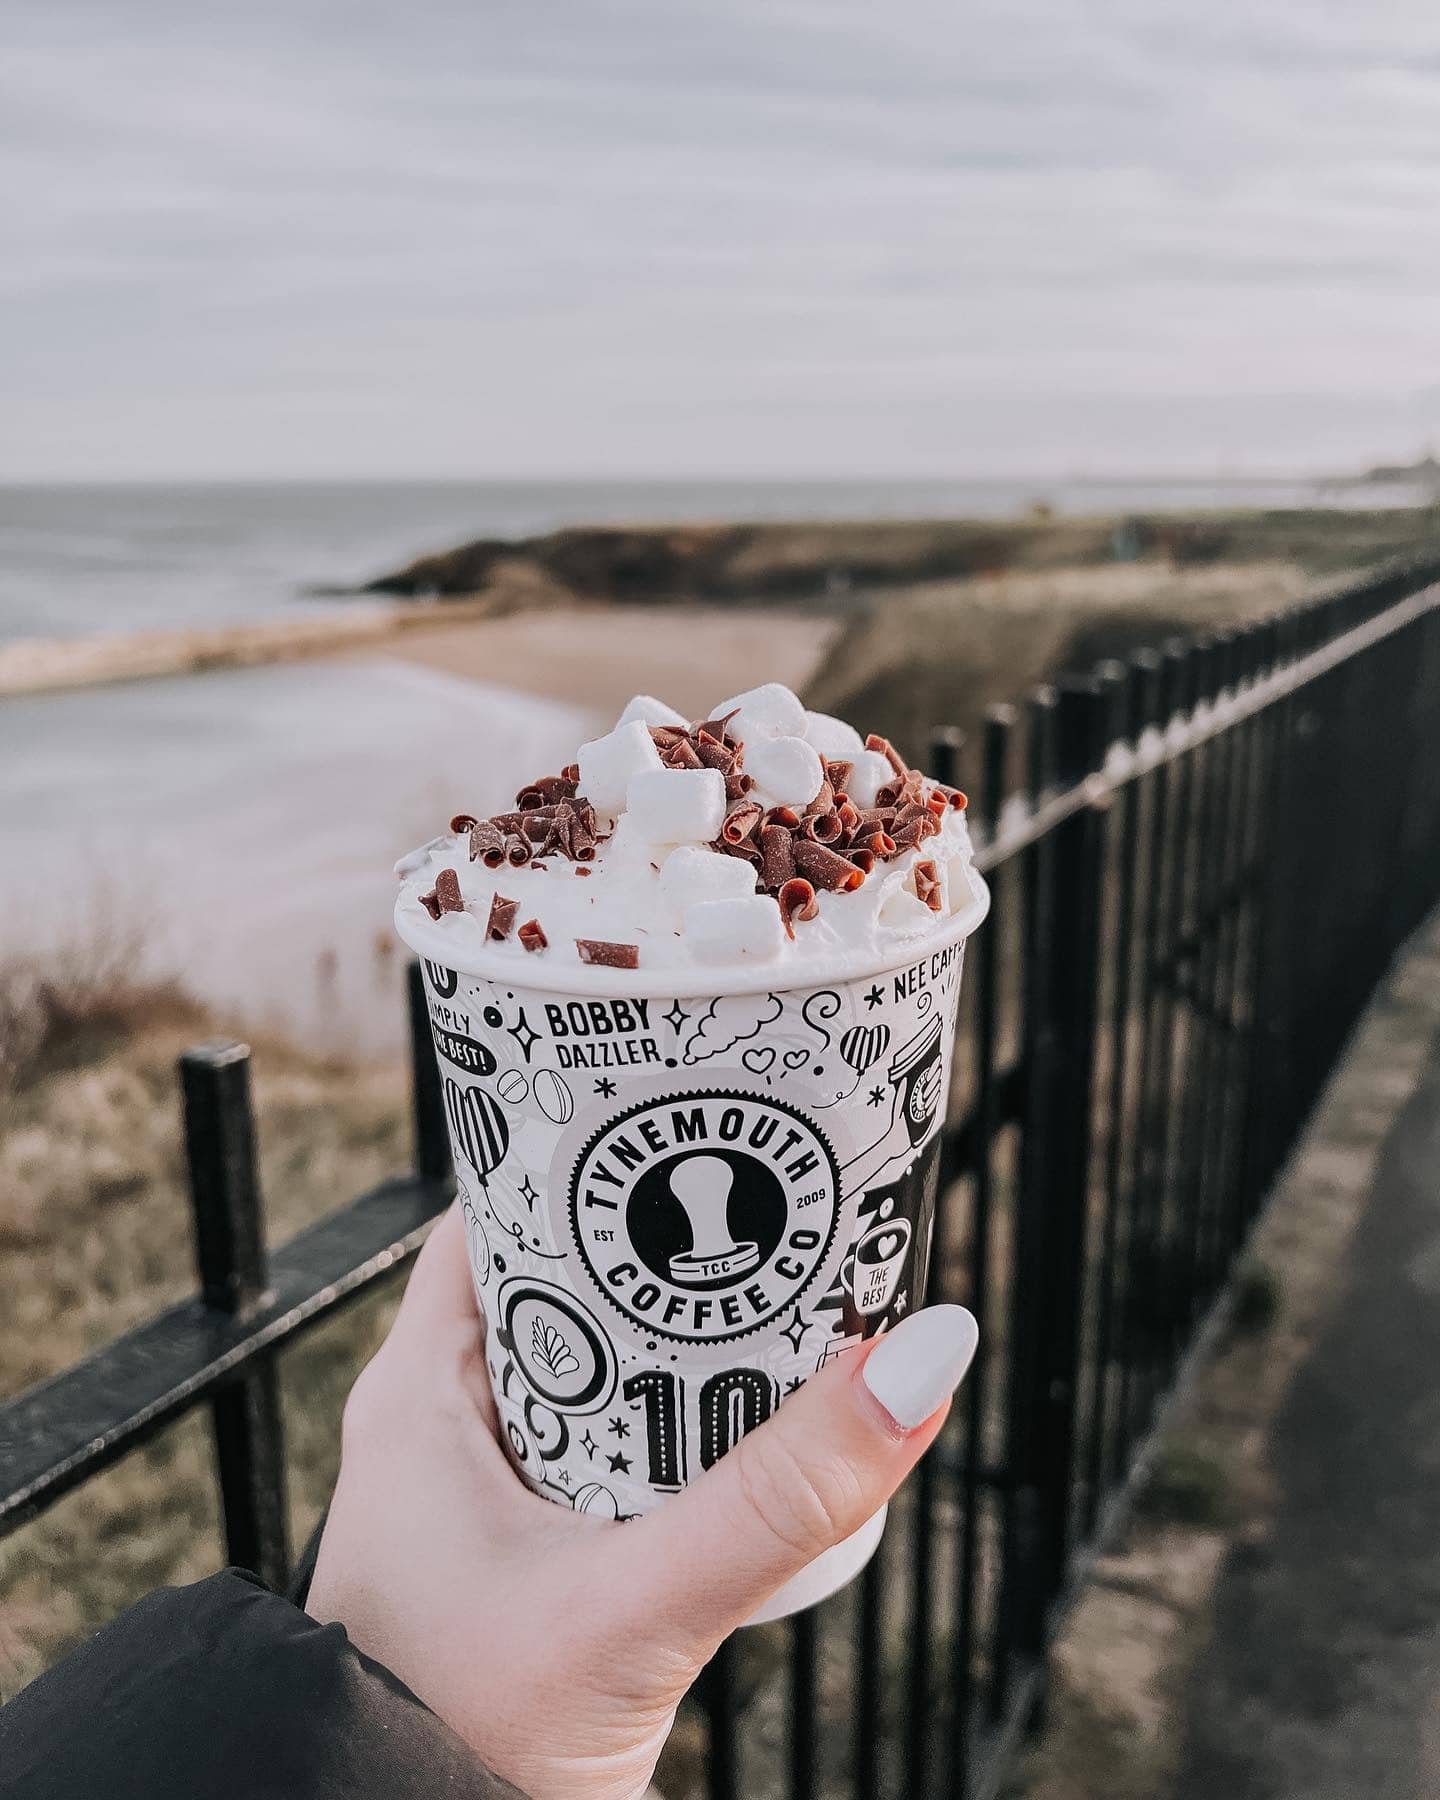 Thoroughly enjoyed my first taste of freedom on my lunch break yesterday, a walk at Cullercoats with Arthur and a Chloe Maes hot chocolate 🌊 
I may be free again but god i’m absolutely knackered, I’m ready to go to bed at 3pm. I also look like a feral vampire, so looking forward to lots of fresh air, food and relax at the weekend. 
‘Get some colour back in ye cheeks’ my nana would have said!
⠀⠀⠀⠀⠀⠀⠀⠀⠀
#cullercoats #coastalliving #january #tynemouth #cullercoastsbay #hotchocolate #tynemouthpriory #northtyneside #newcastle #newcastleupontyne #livingnorth #visitengland #visitbritain #nebloggers #northeast #newcastlelifestyle #newcastlelife #livingnorth #instatravel #igtravel #wanderlust #travelblog #travelblogger #travelblogging  #travelcommunity  #travelpics #tynemouth #travelphotography #lifestyle #lifestyleblogger